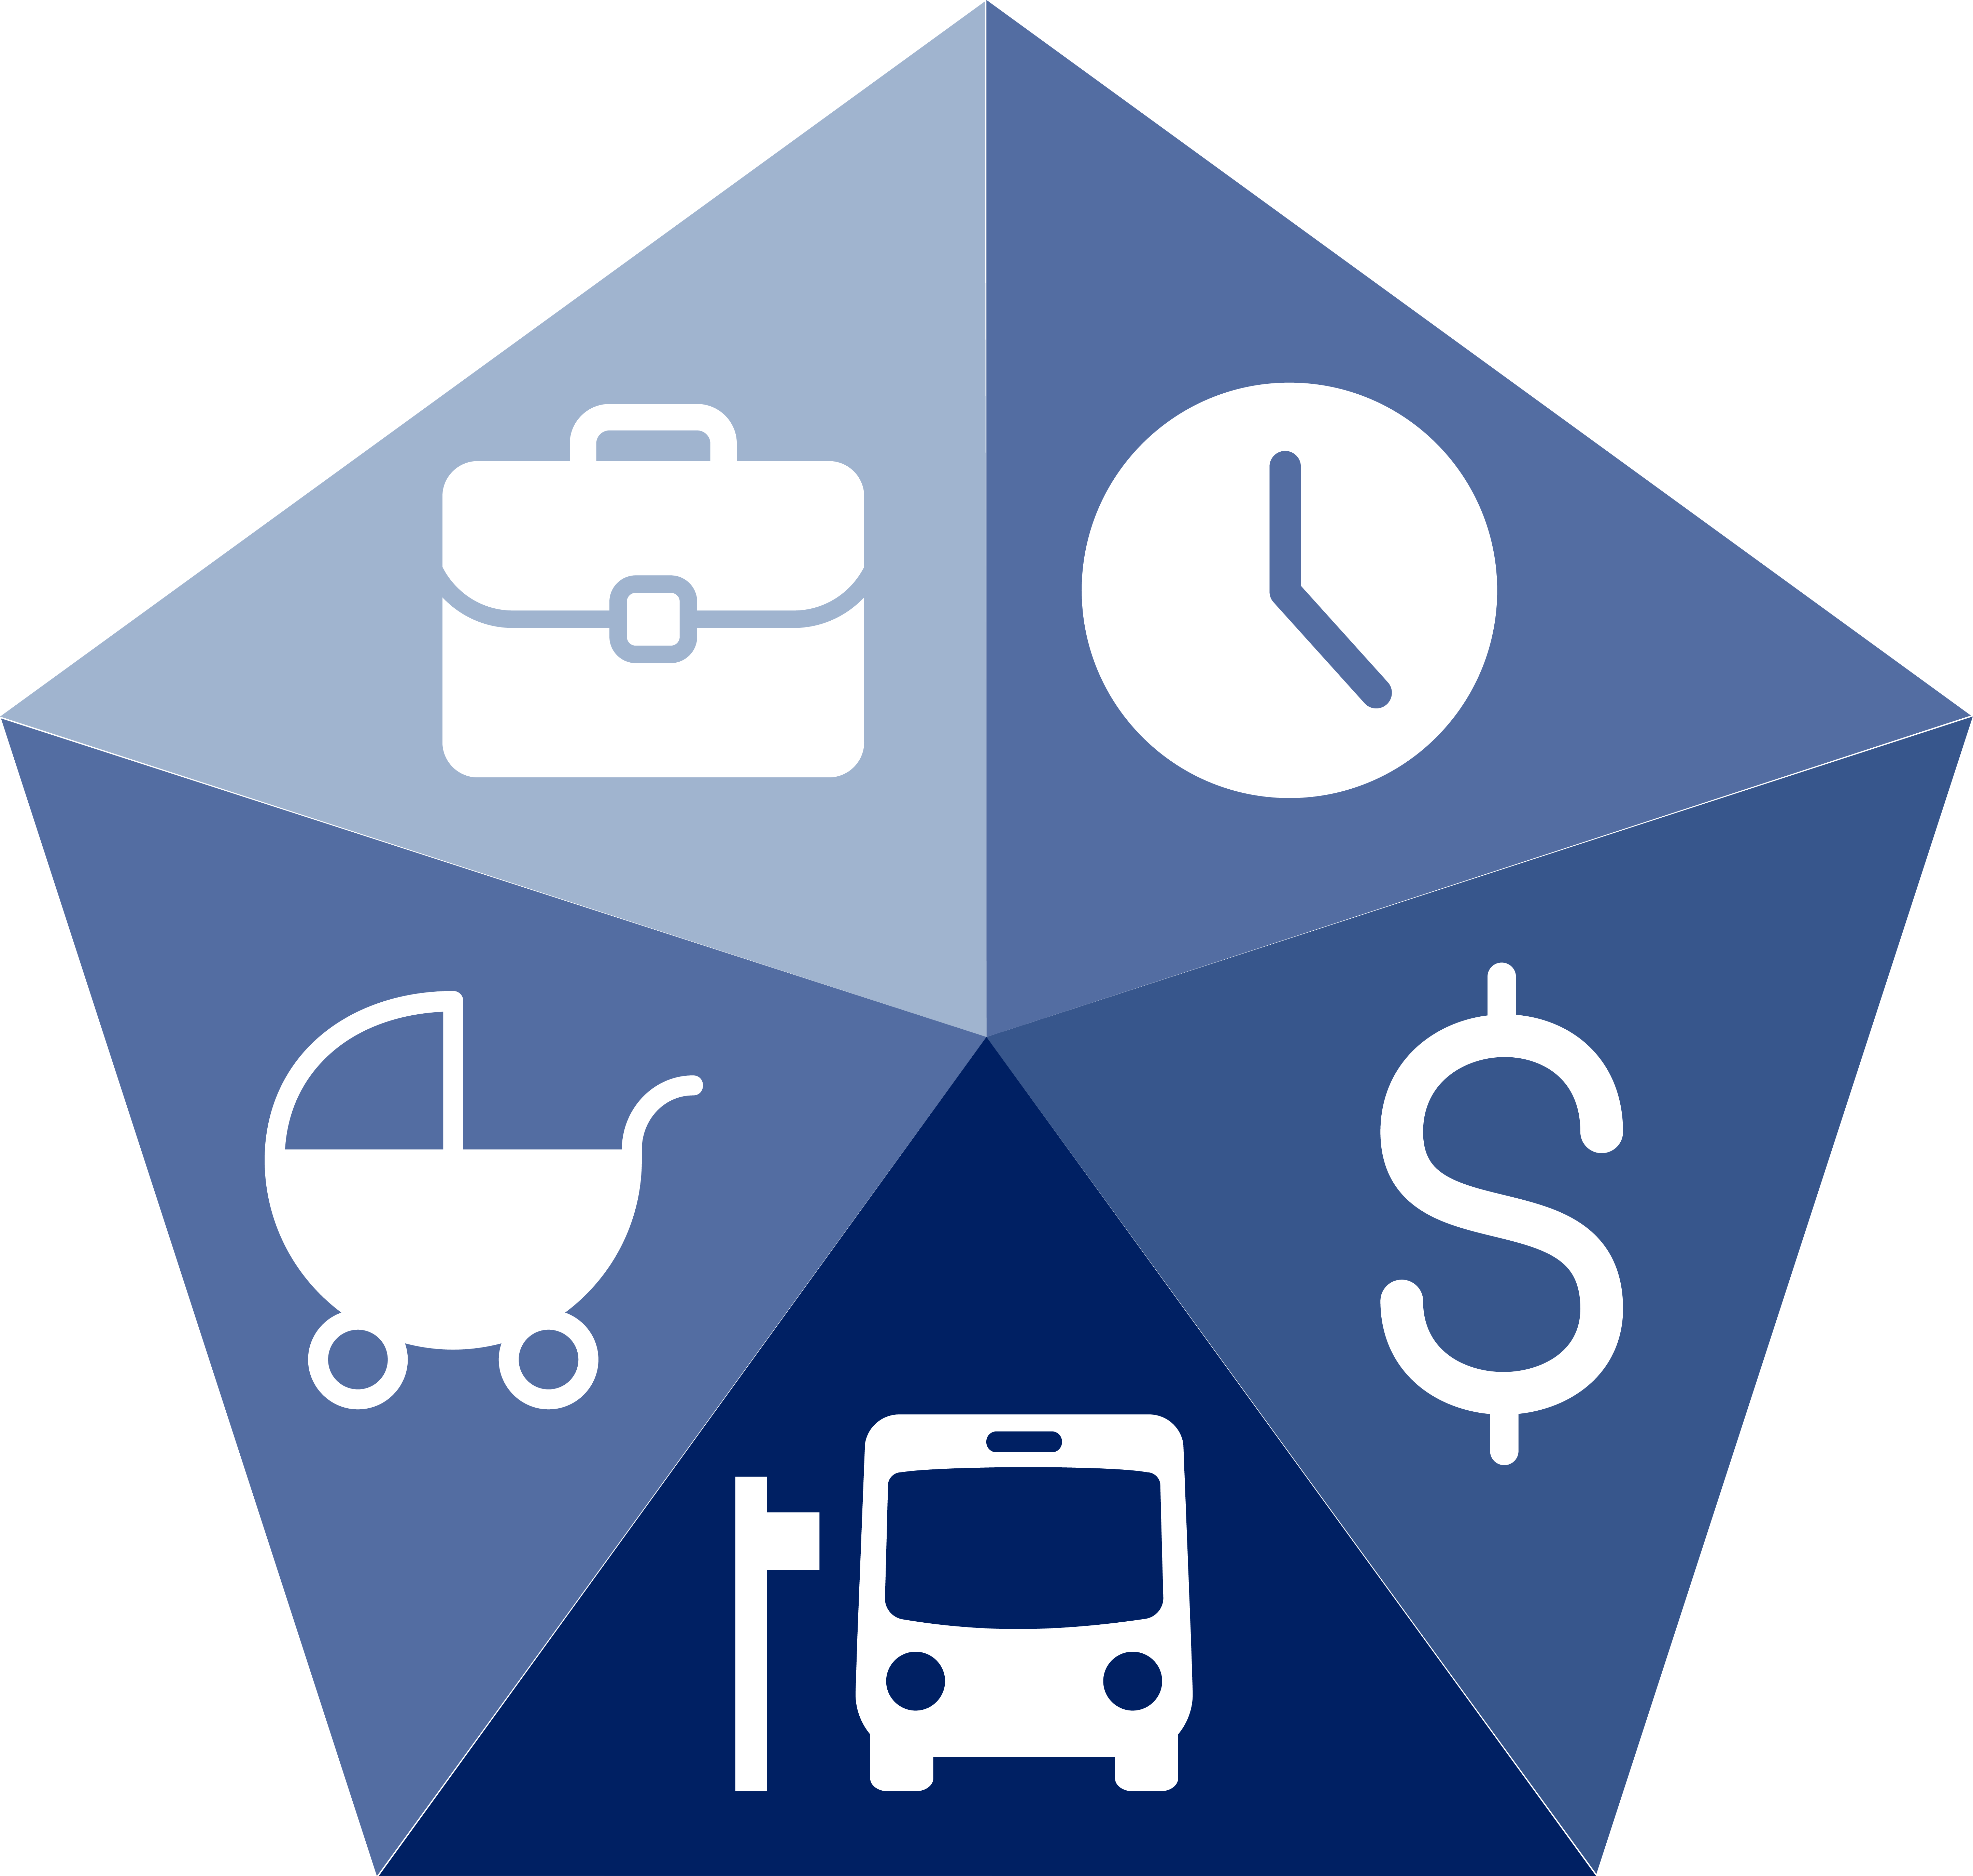 drawing of a pentagon with icons in each of the 5 sections to represent the various aspects of student life: clock, baby carriage, briefcase, bus transportation,  and dollar sign